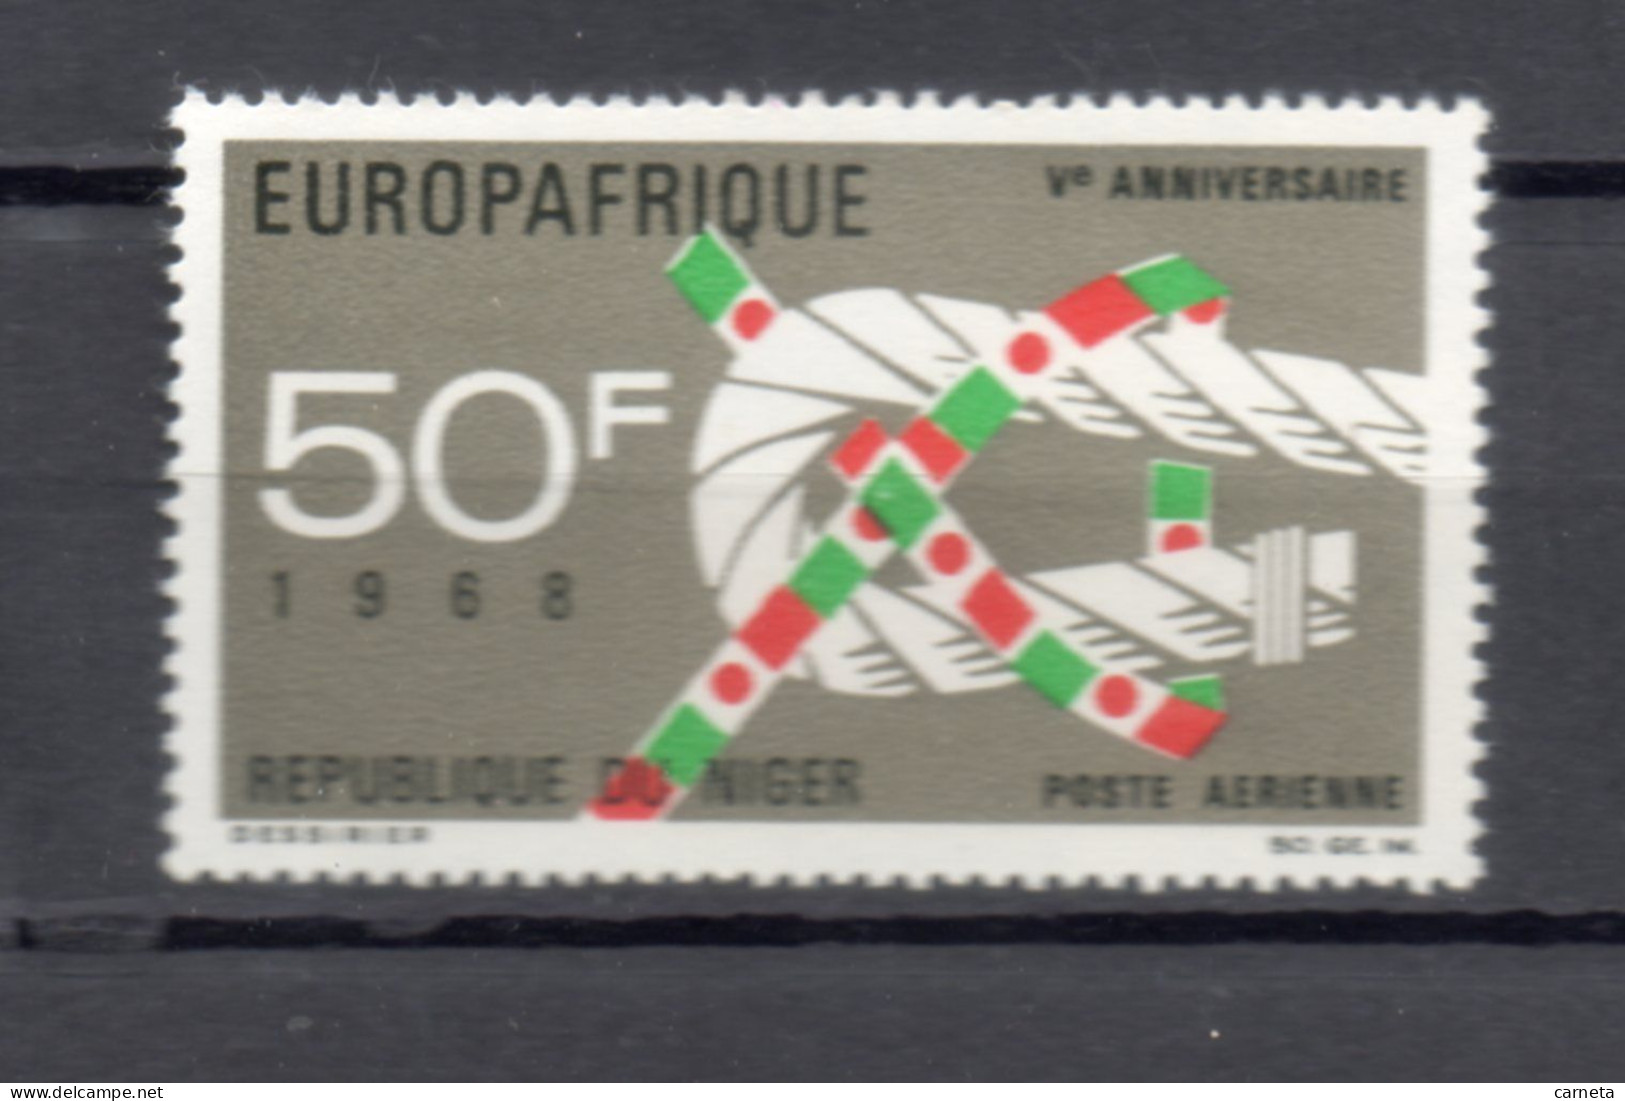 NIGER  PA   N° 89    NEUF SANS CHARNIERE  COTE 1.20€    EUROPAFRIQUE - Niger (1960-...)